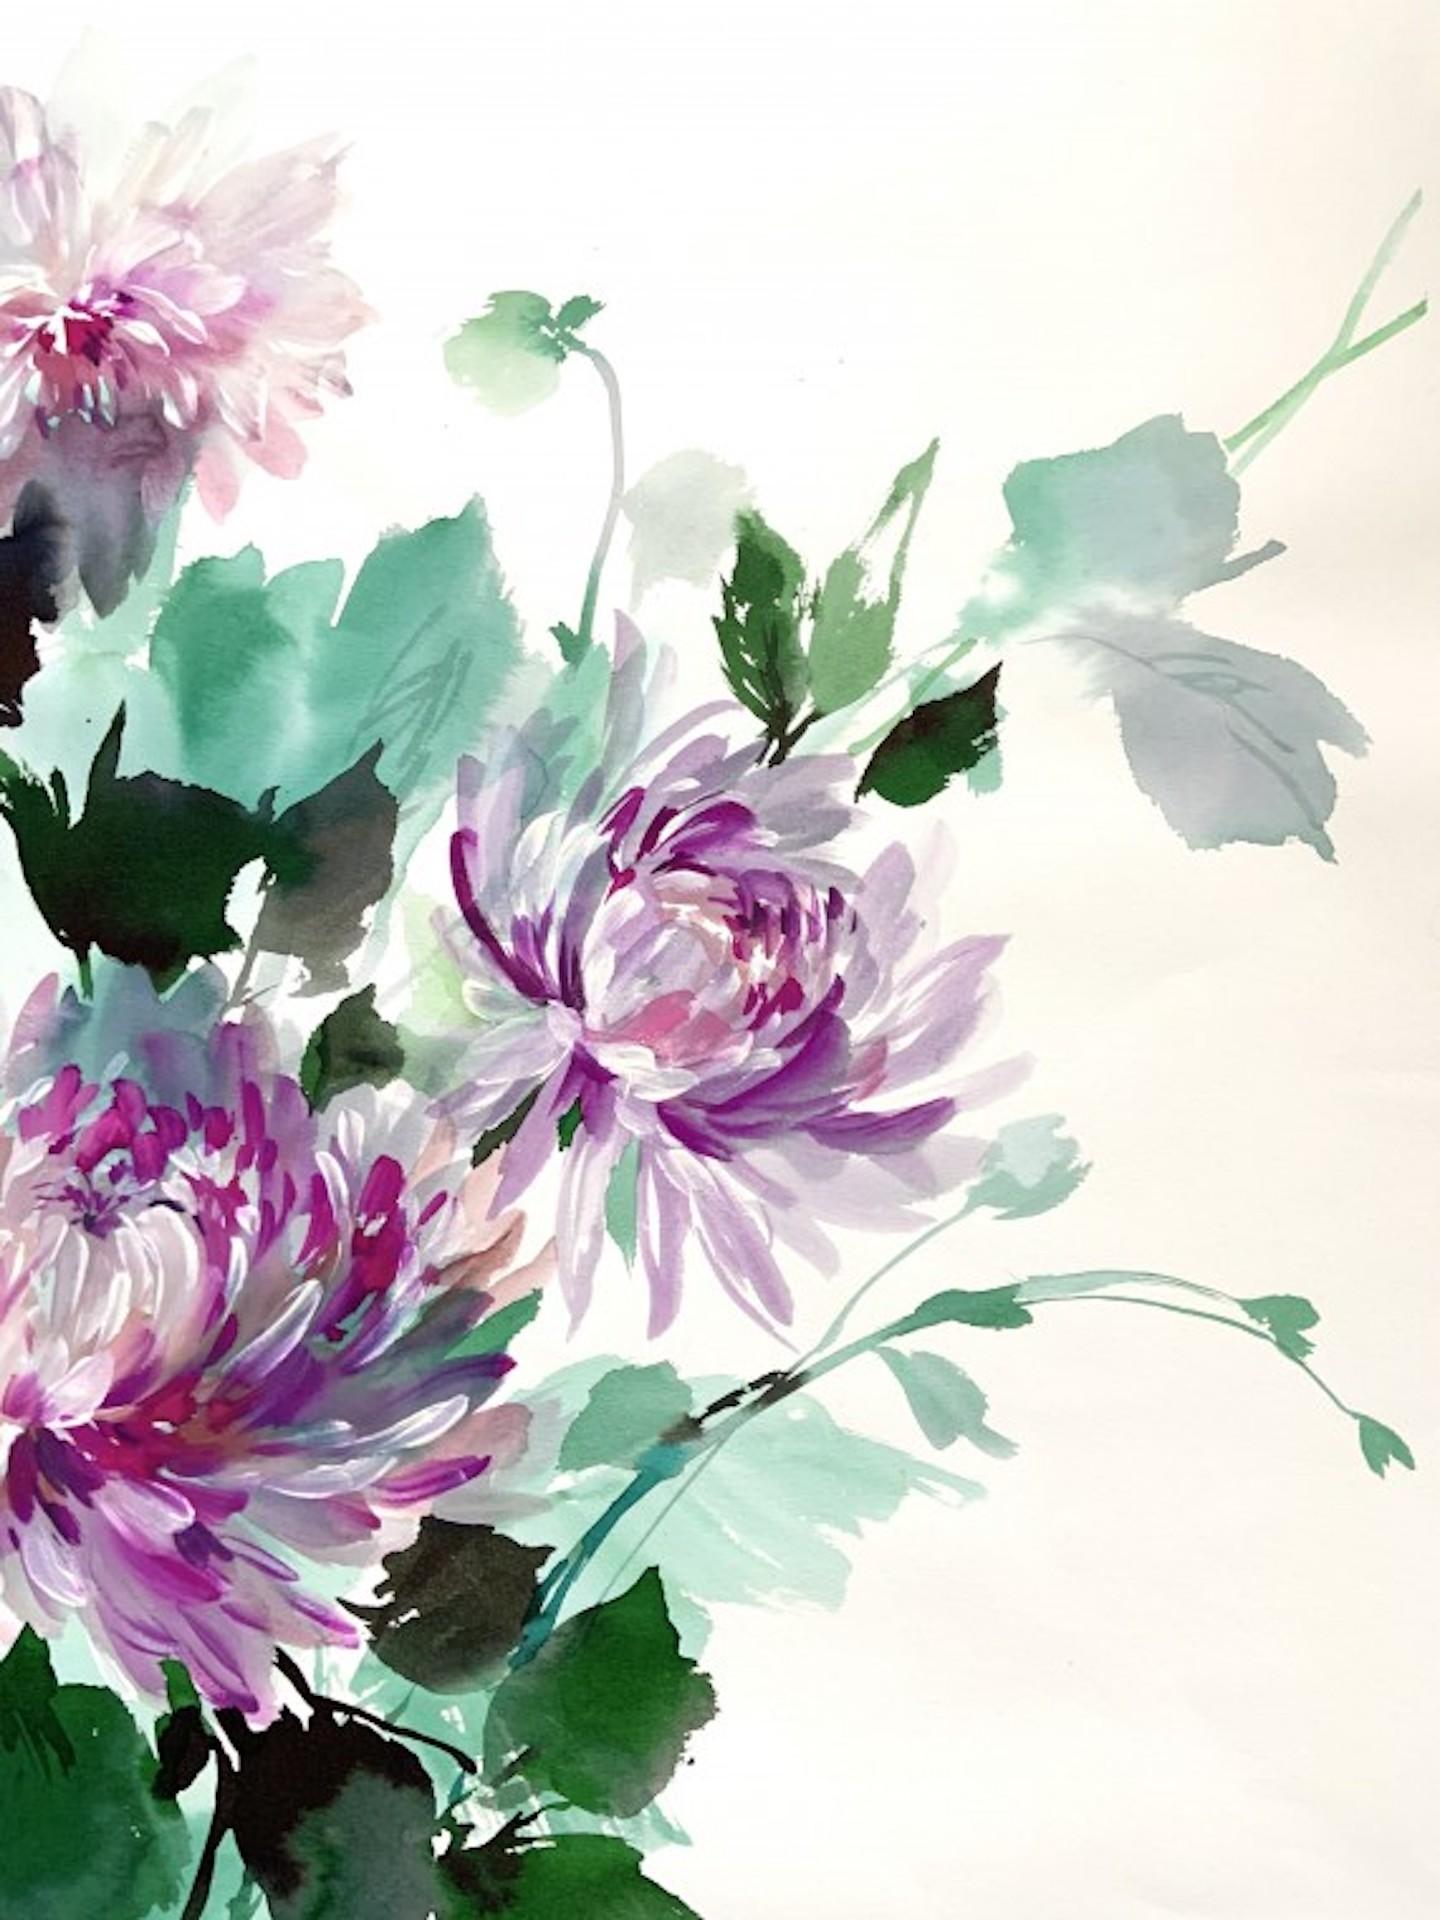 Jo Haran
Drenched Chrysanthemums 
Original
Flowers
Watercolour, gouache and gesso
Image size: H:73 cm x W:54 cm
Paper size: H:76 cm x W:56 cm x D:0.001cm
Sold Unframed

Please note that insitu images are purely an indication of how a piece may